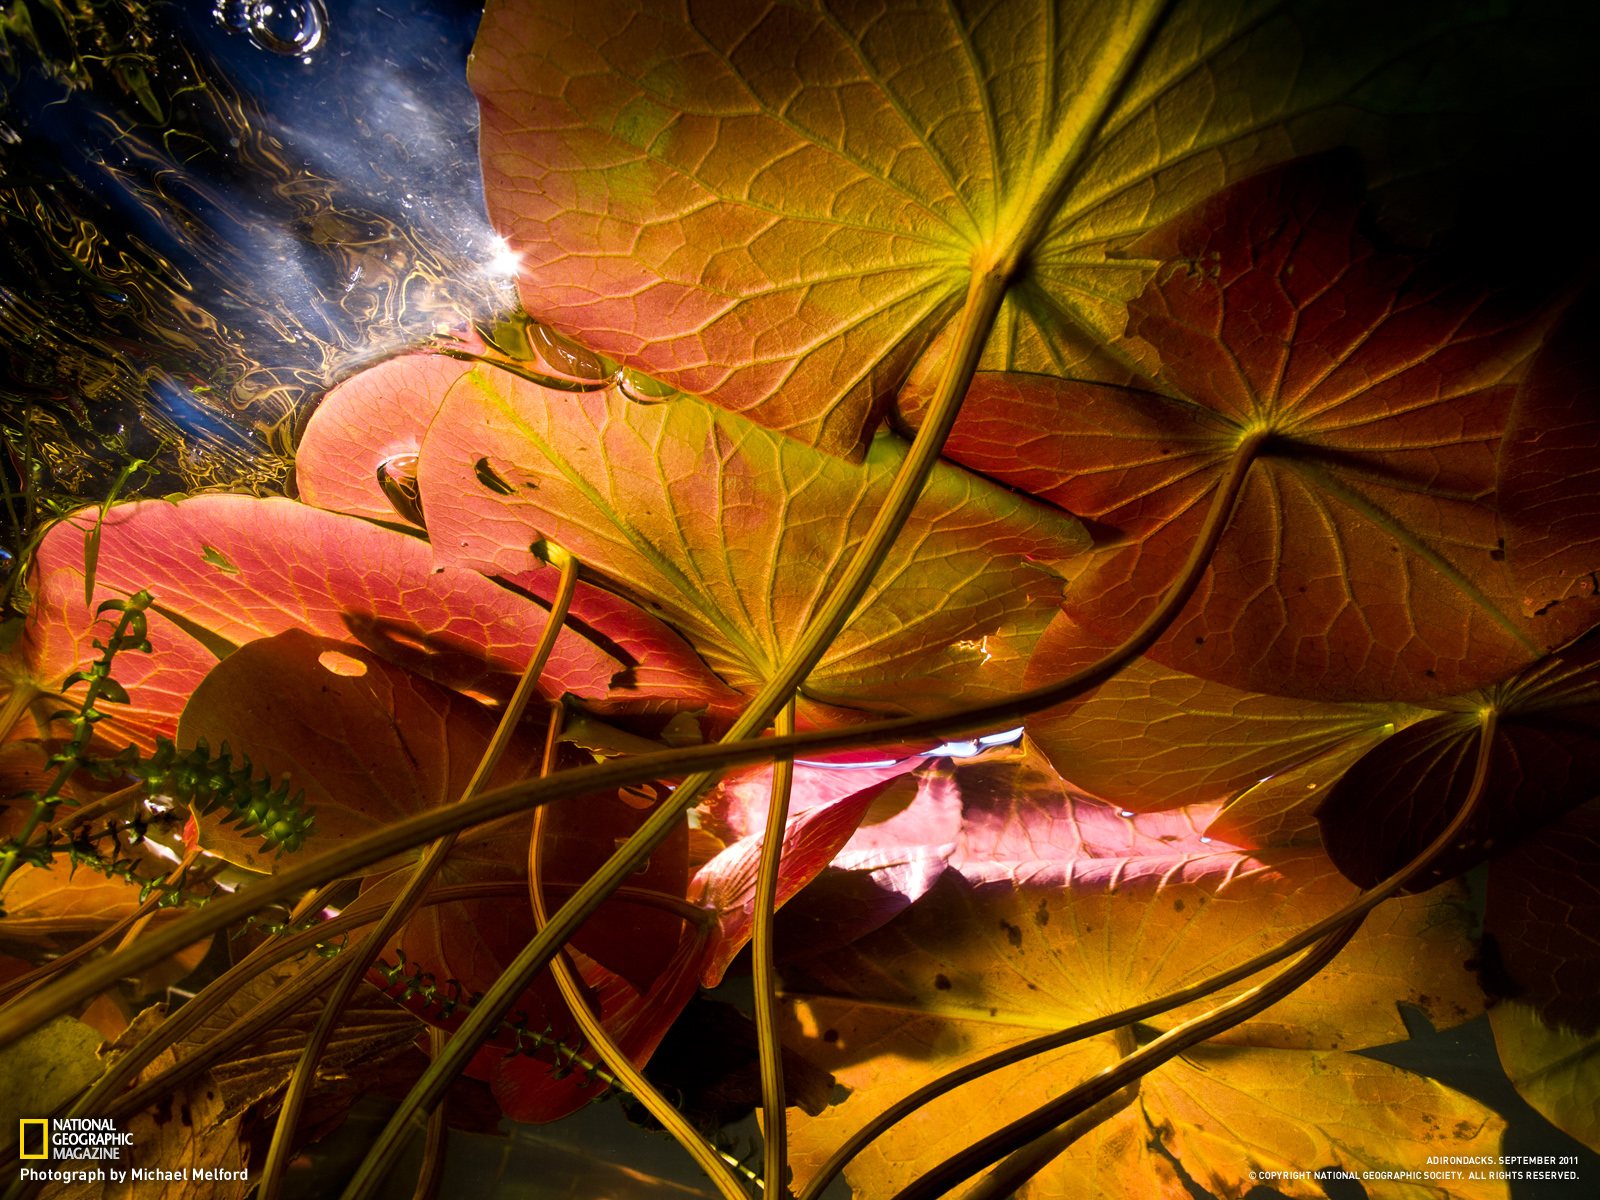 Lily Pad Picture Nature Wallpaper National Geographic Photo Of The